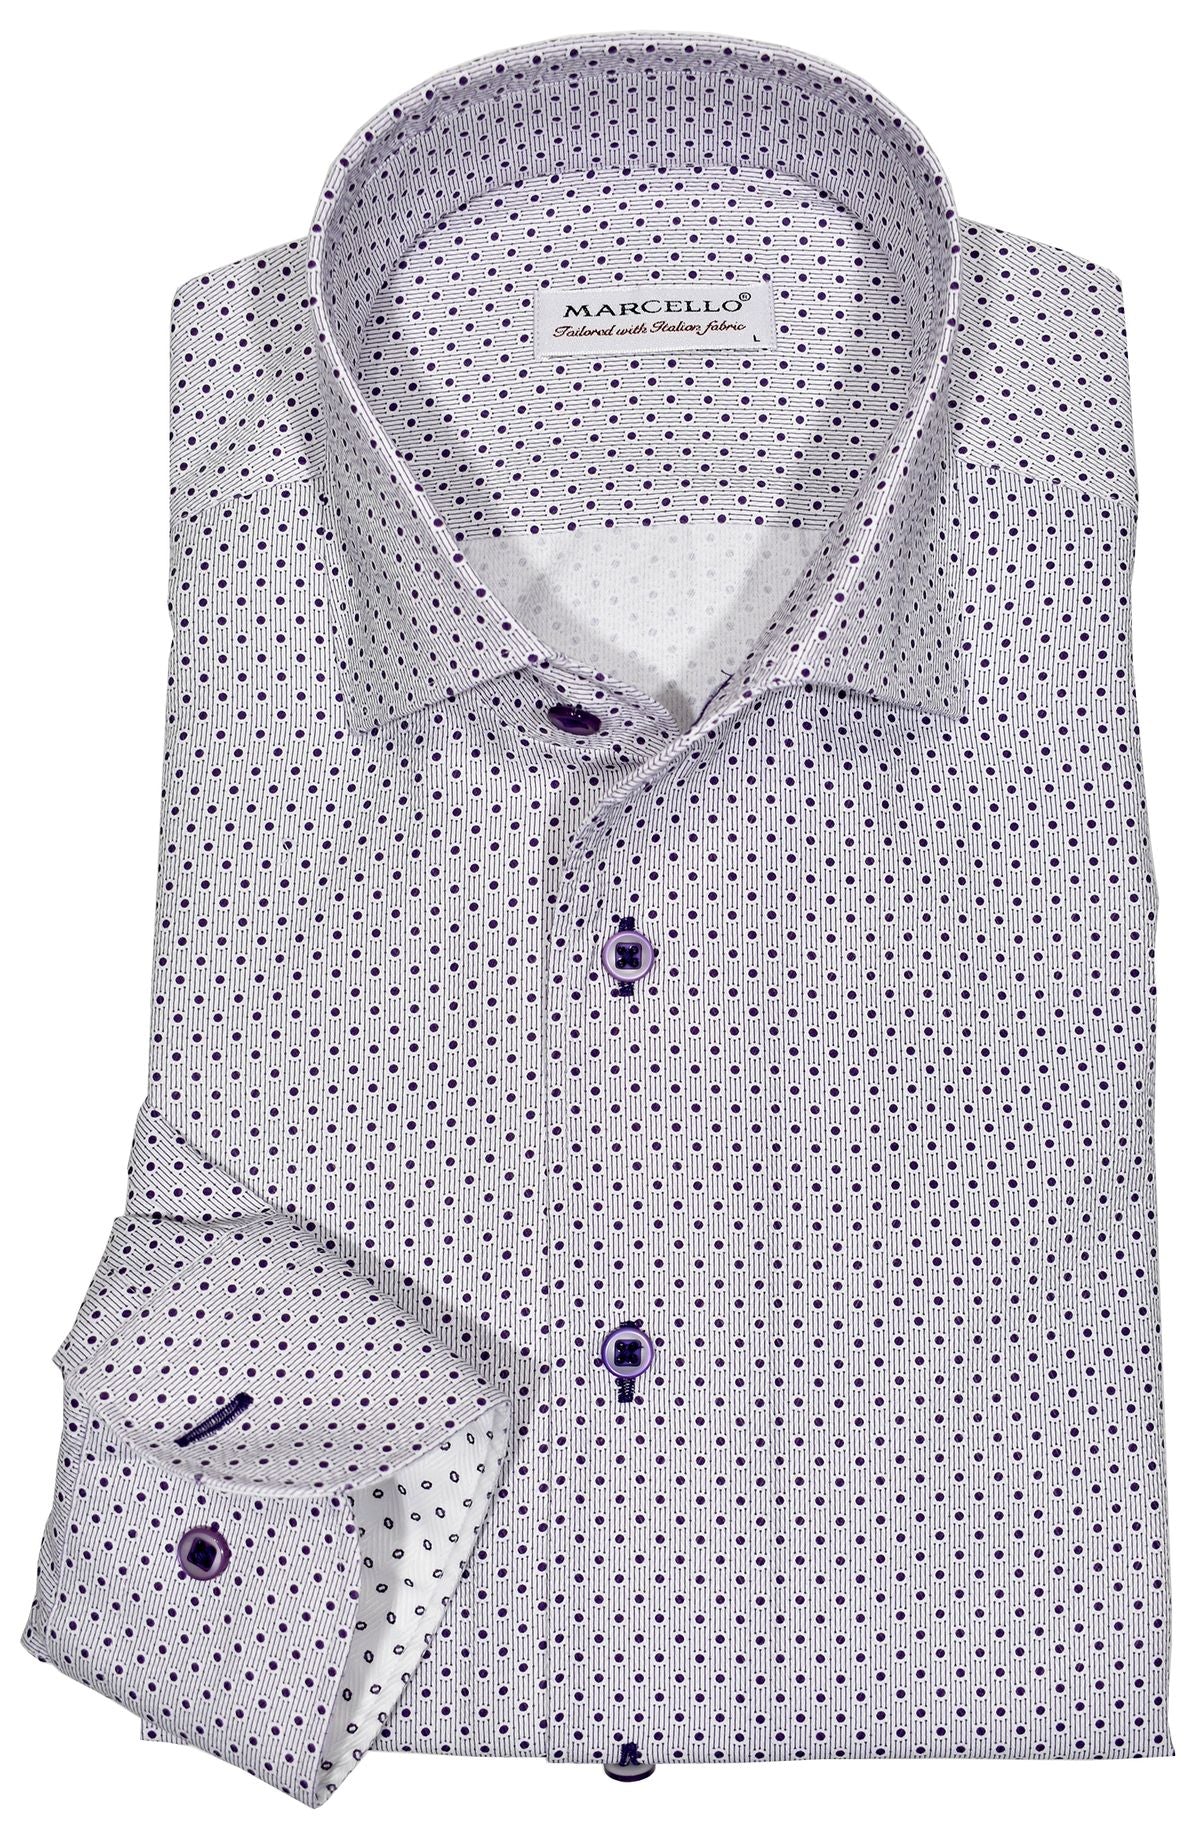 Exclusive Marcello 1 Piece Roll Collar Shirt.  The one piece roll collar stands perfectly and looks fantastic alone or under a sport coat.  The classic lilac dot pattern coupled with a rich tonal herringbone fabric creates a sophisticated look to set your apart from the rest.  Hand selected buttons, two button cuff placket for the best look when rolling up the cuffs and enhanced stitch detailing.  Classic shaped fit.